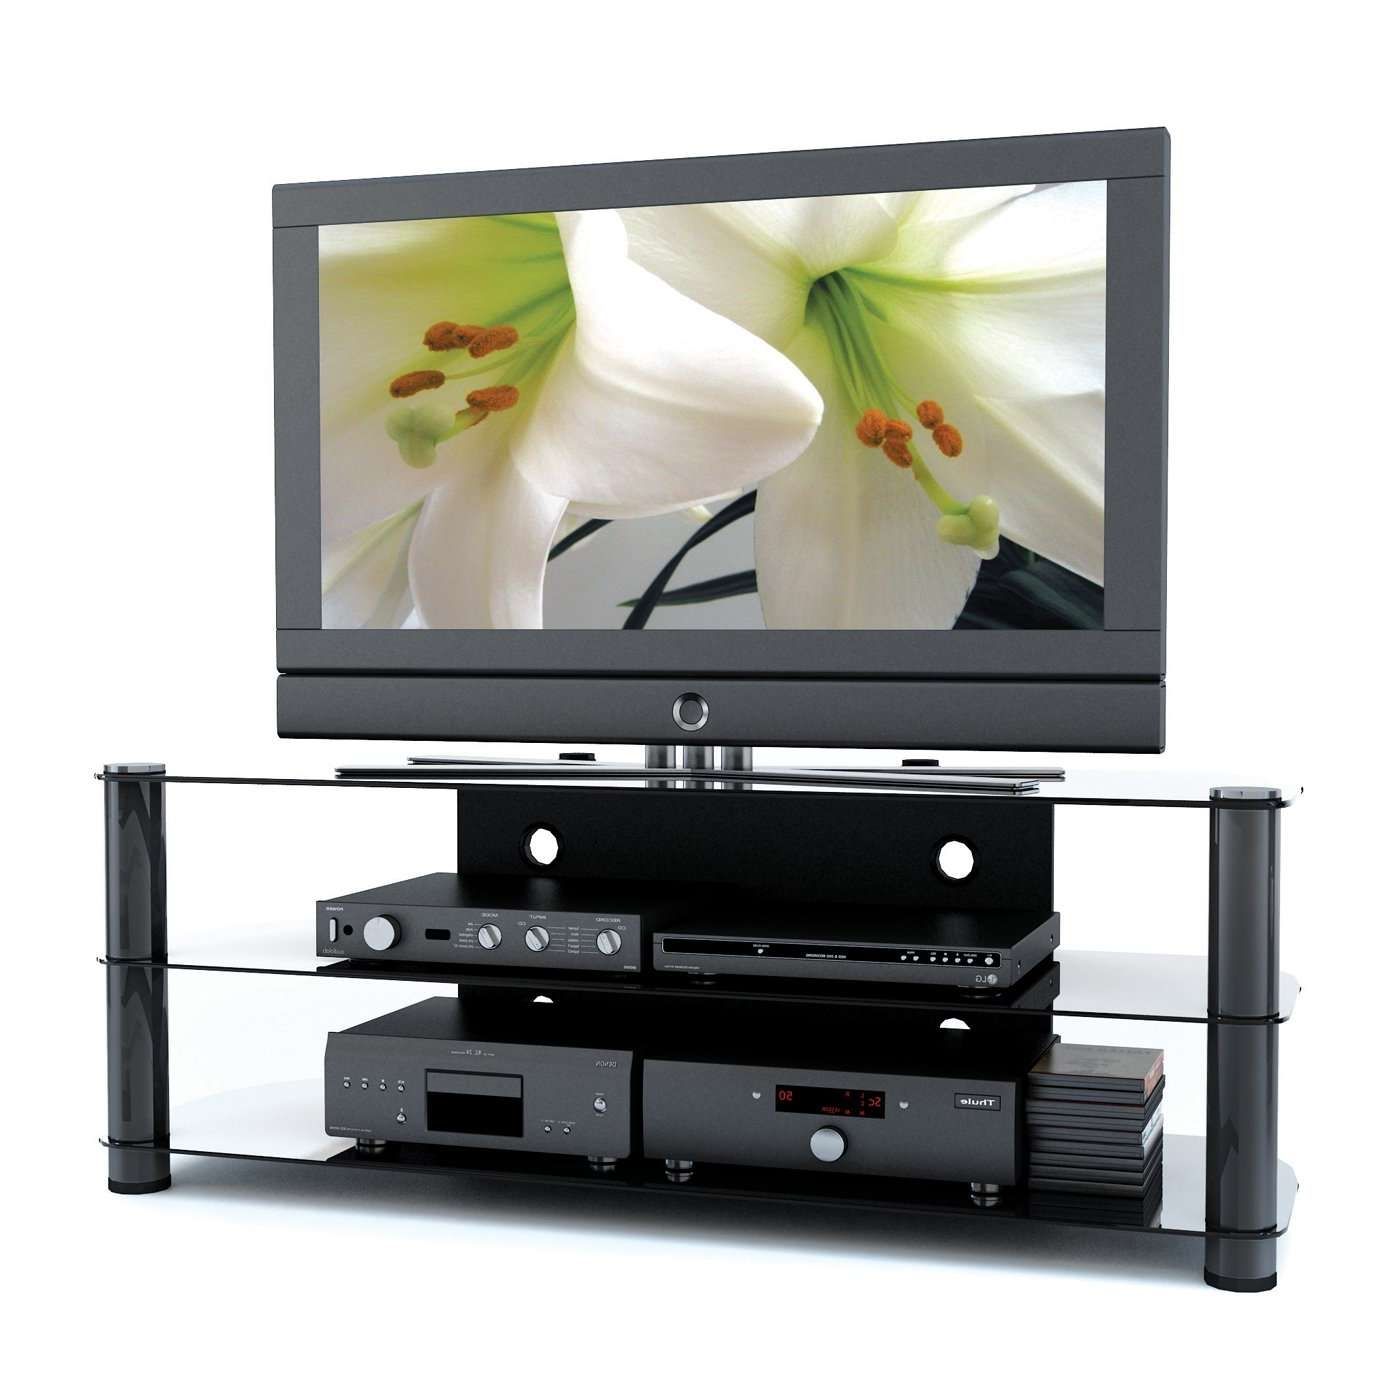 Corliving Ny 9584 New York Metal And Glass Tv Stand | Lowe's Canada Pertaining To Modern Glass Tv Stands (View 13 of 15)